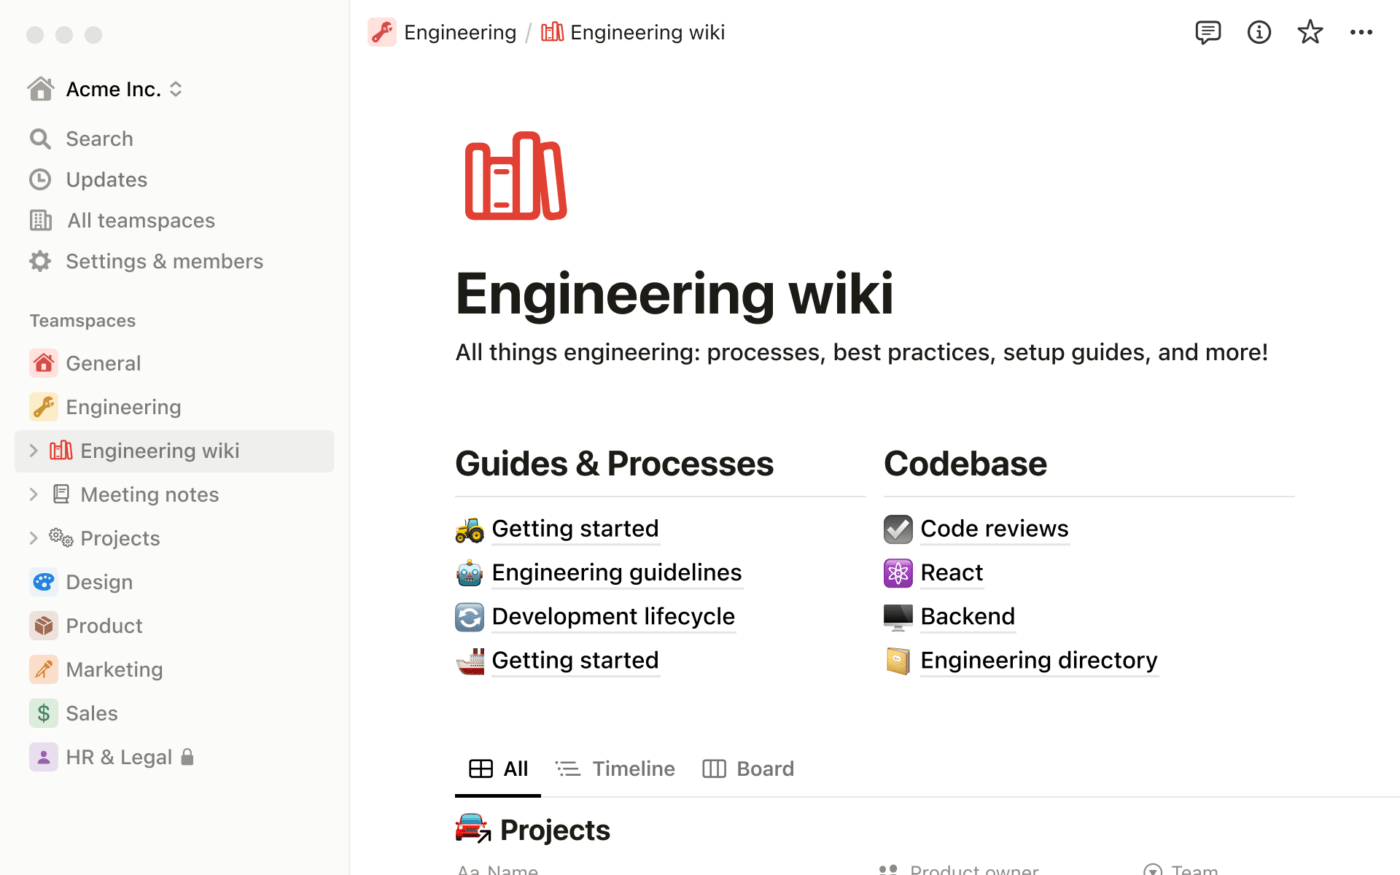 Example engineering wiki created through Notion's freeform features